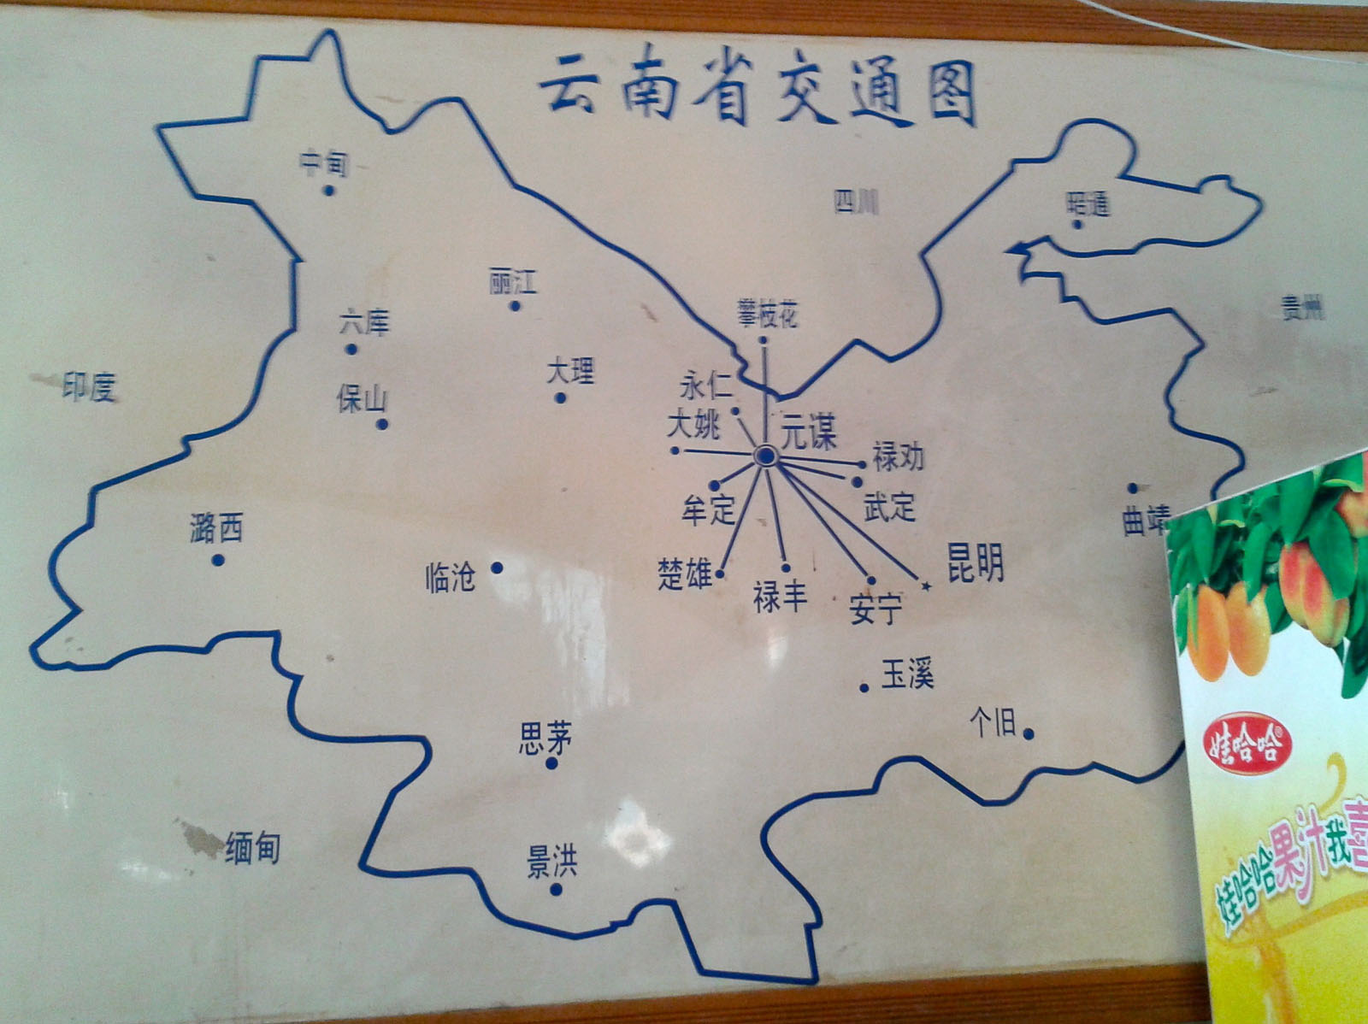 Picture: Long-distance terminal with connections to Kunming, Dayao, Chuxiong, Panzihua. 